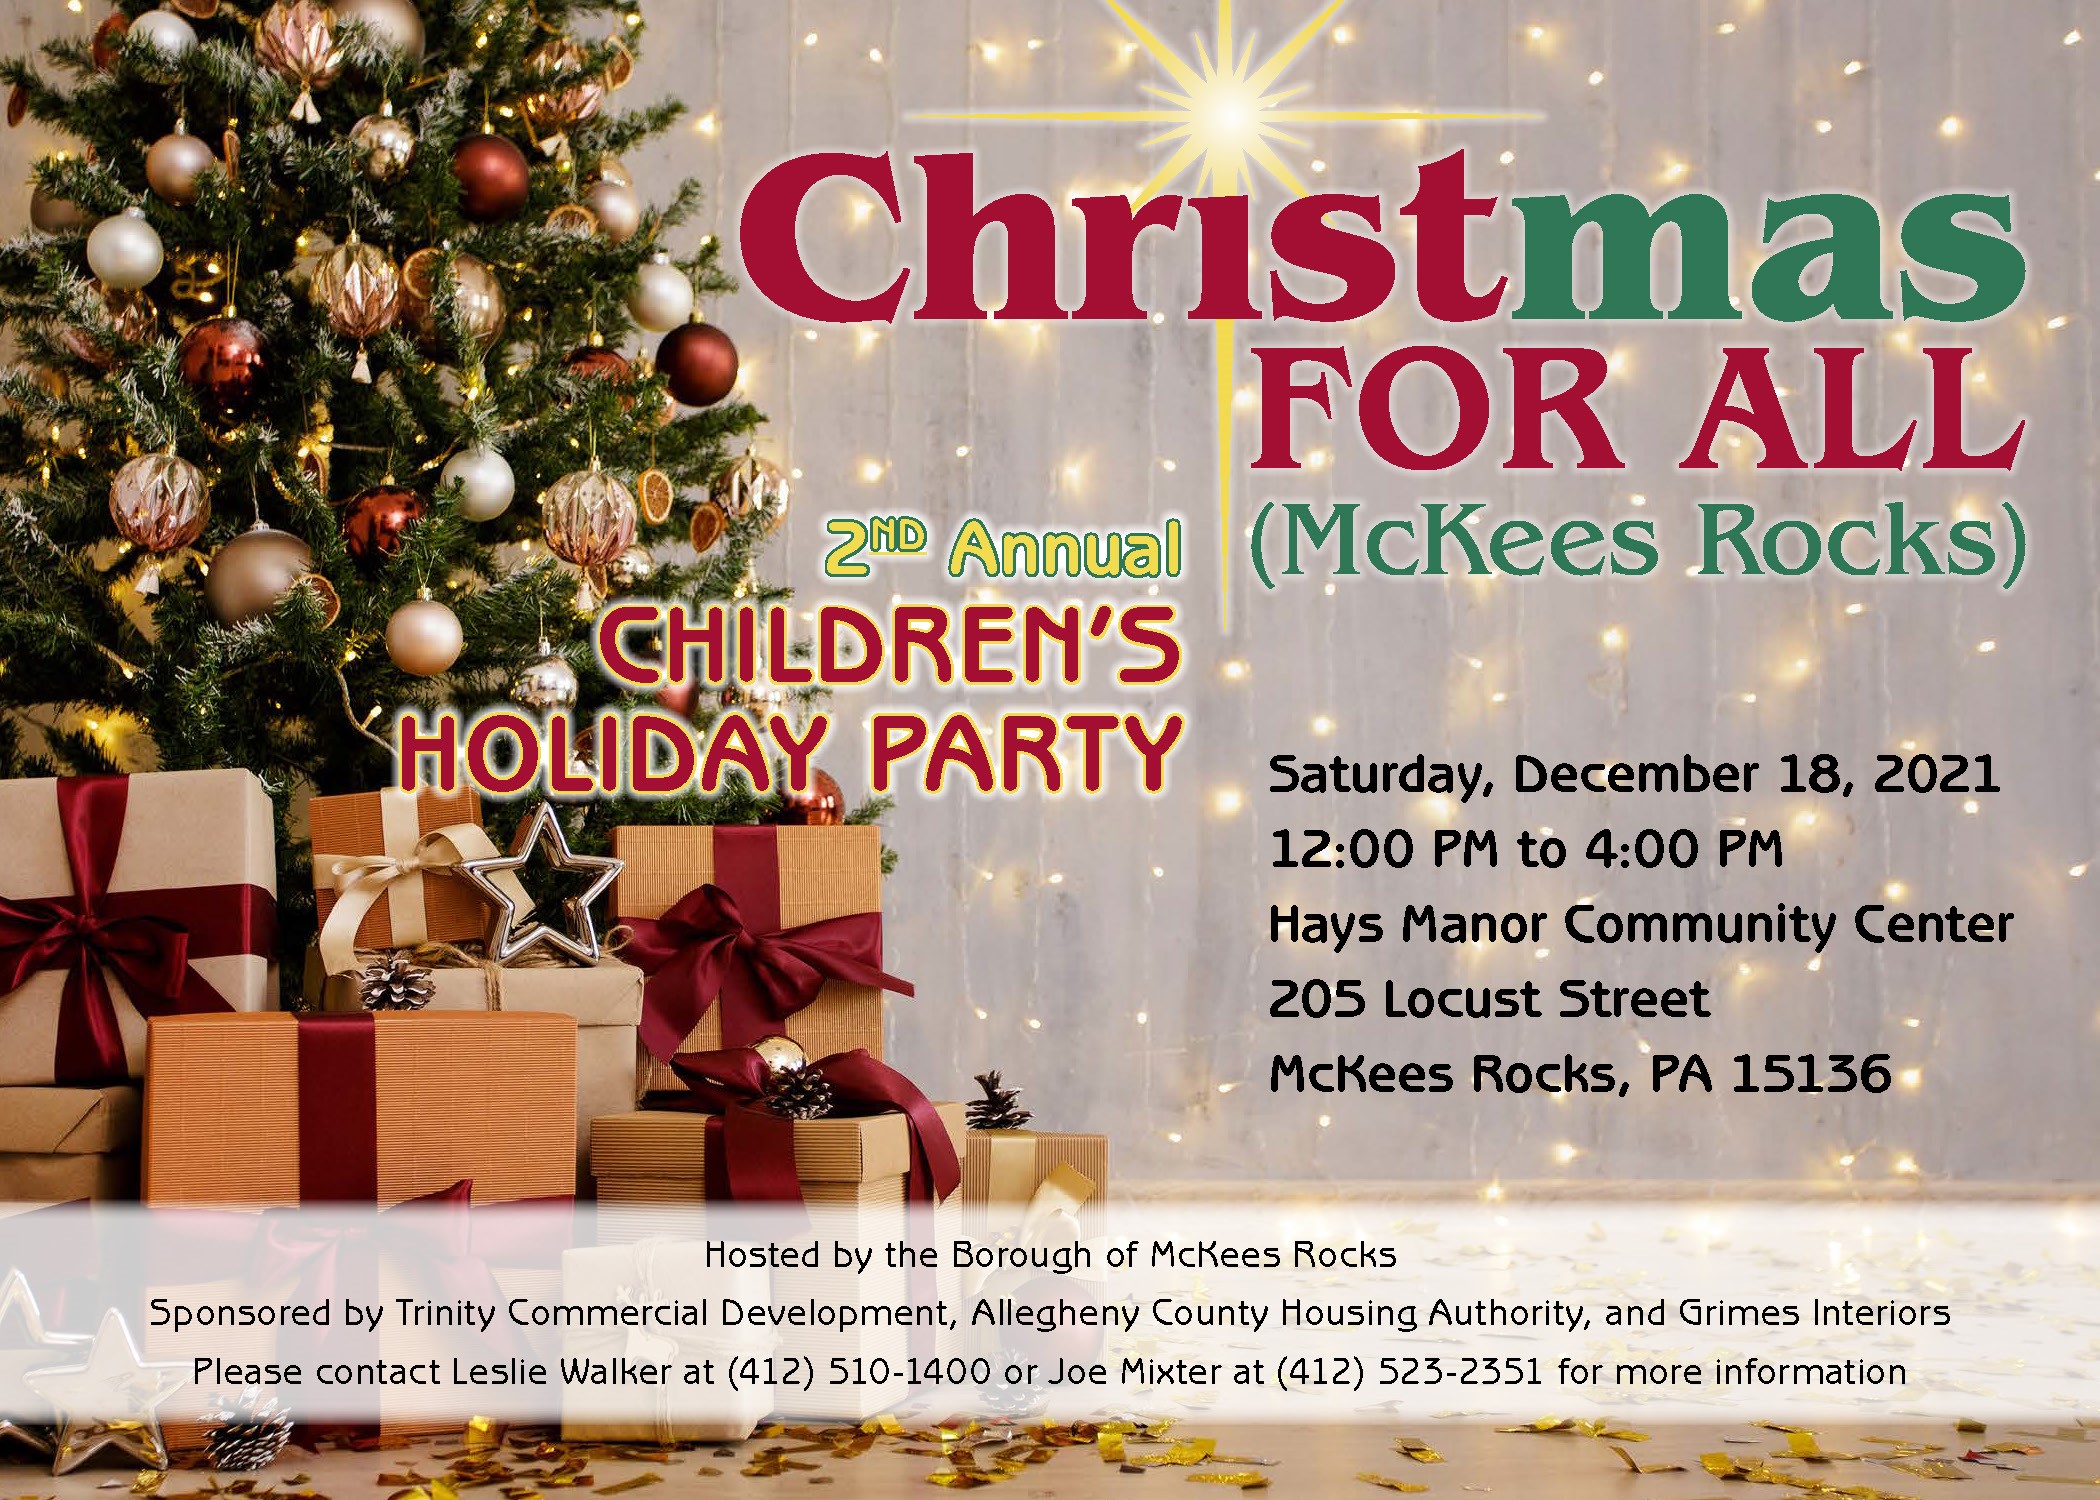 Invite To 2021 Chistmas For All Childrens Holiday Party   Borough Of Mckees Rocks   December 18 2021